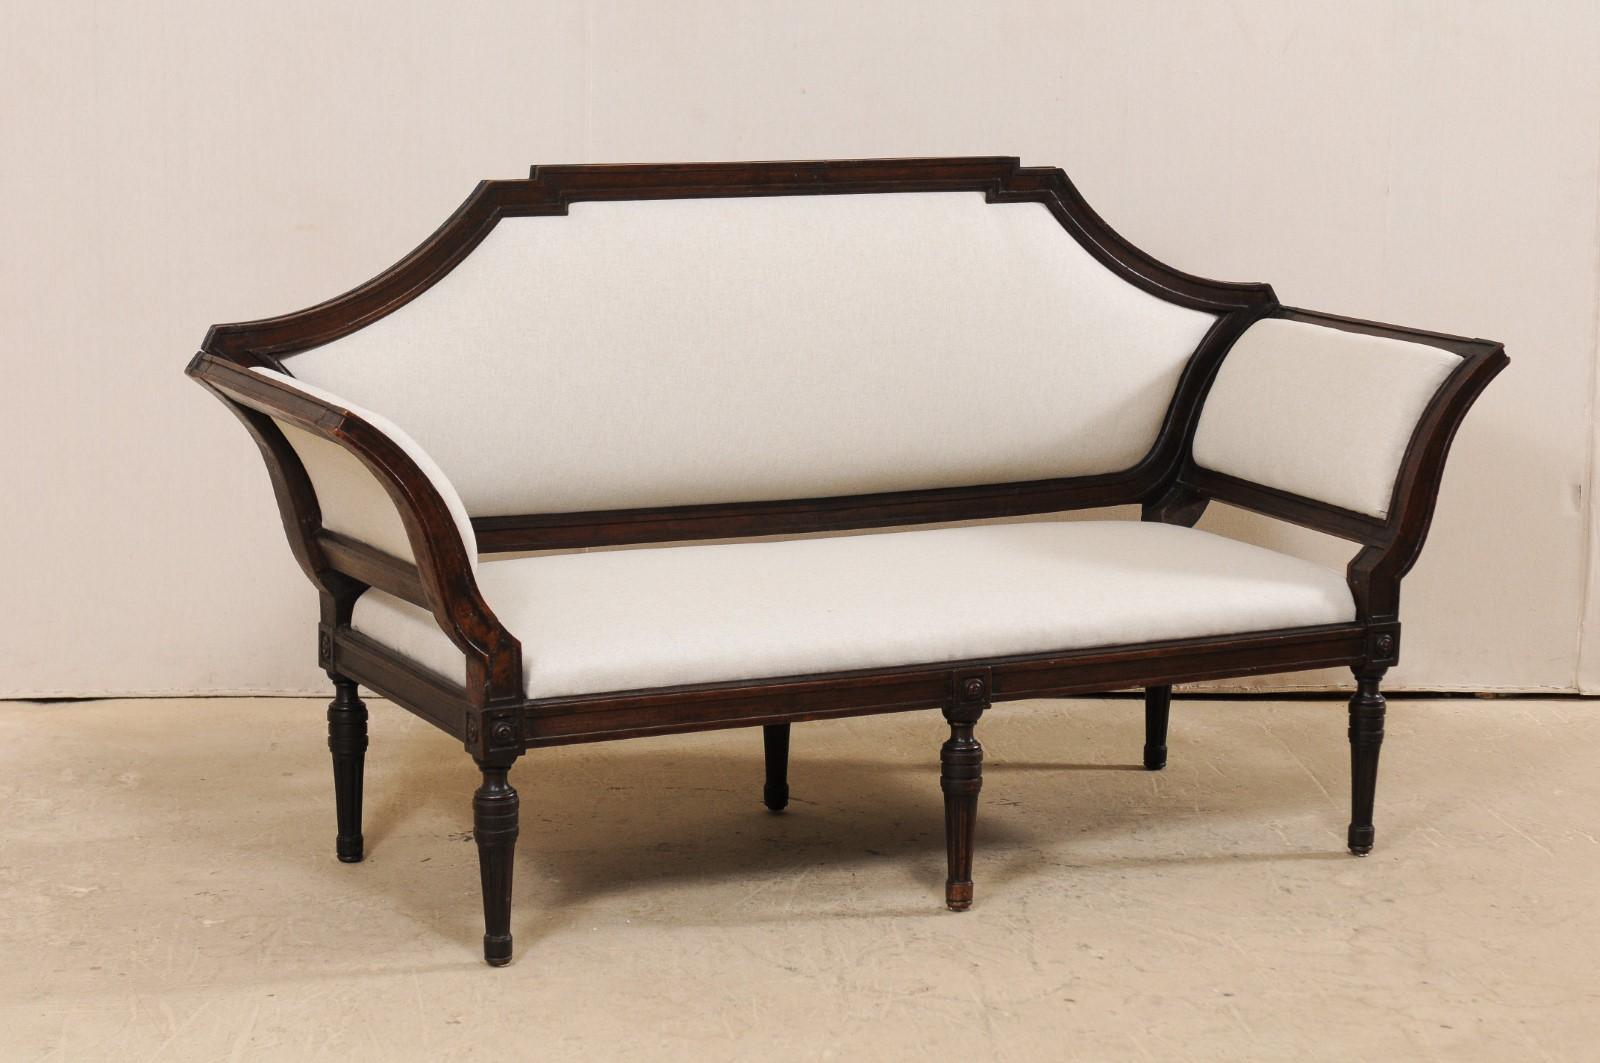 An 18th century Italian Venetian sofa with removable back. This antique sofa from Italy, just over 6 feet in length, features a beautiful wood trimmed lines throughout; the flat-edged wooden crest rail which flows gently down the arms, which